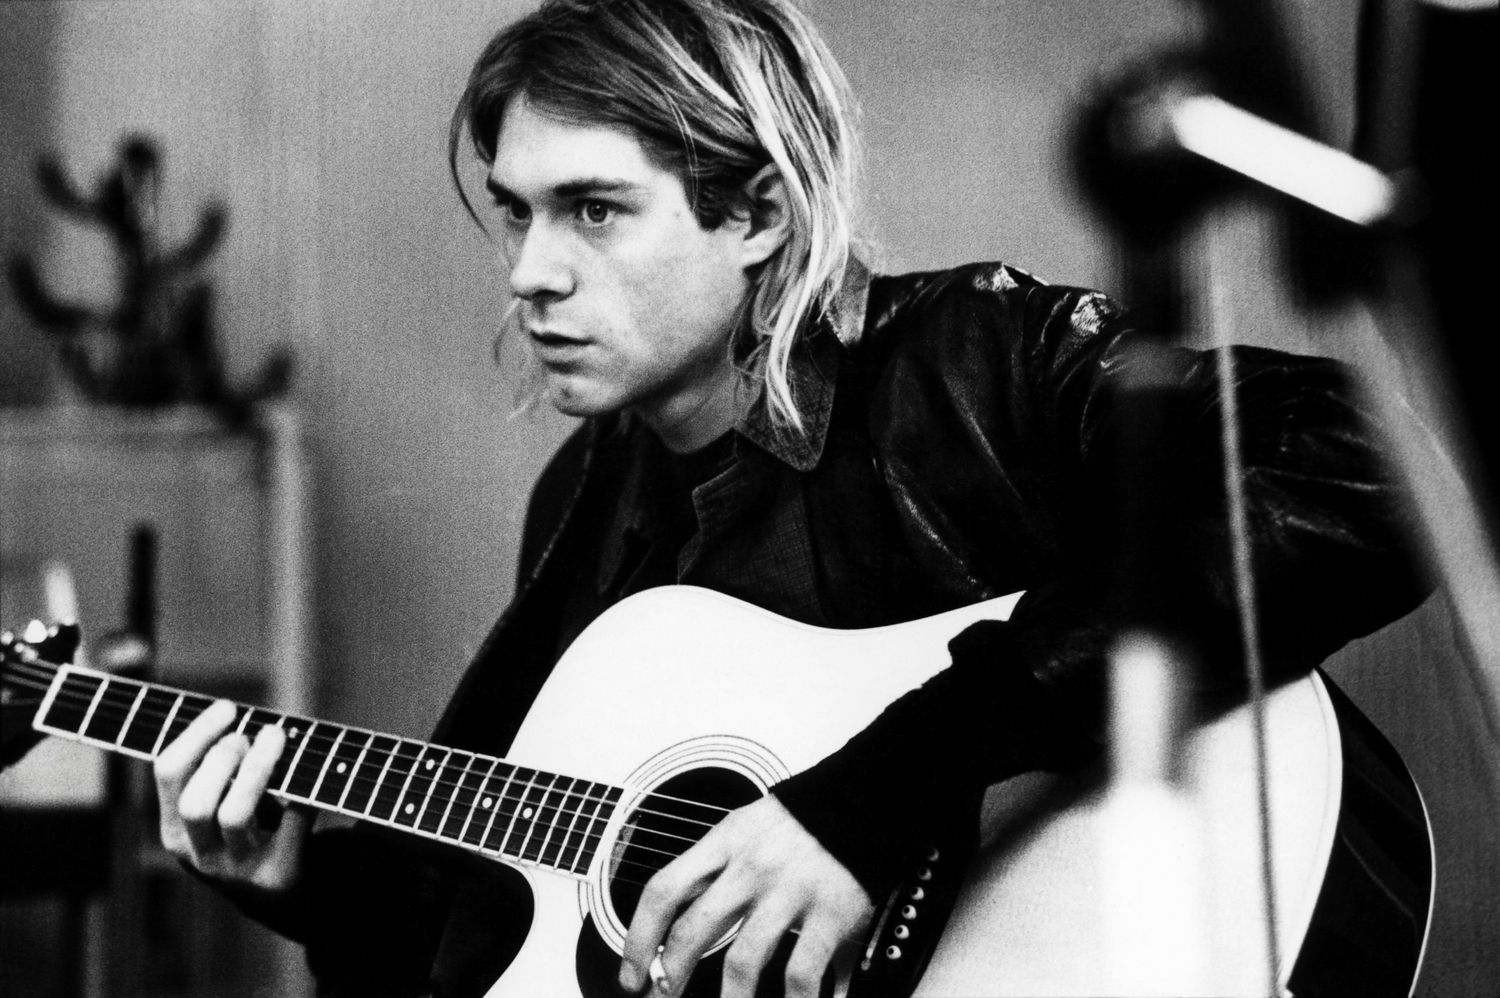 Who Led The Band Nirvana As A Singer, Songwriter, And Guitarist?